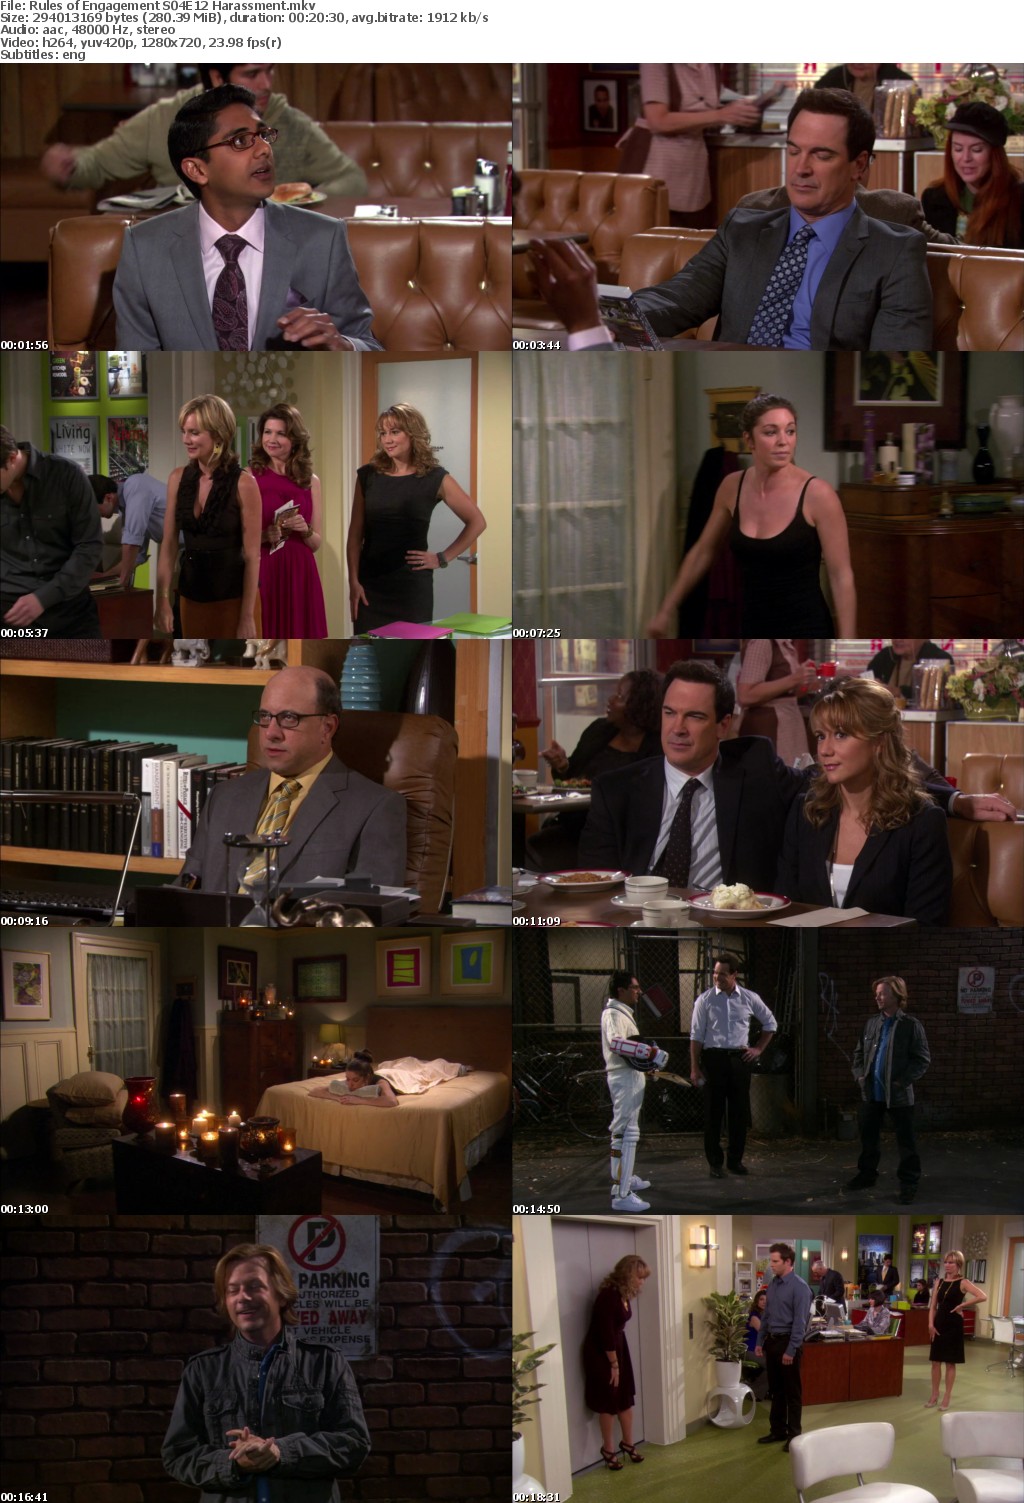 Rules of Engagement 2007 Season 4 Complete 720p NF WEBRip x264 i c